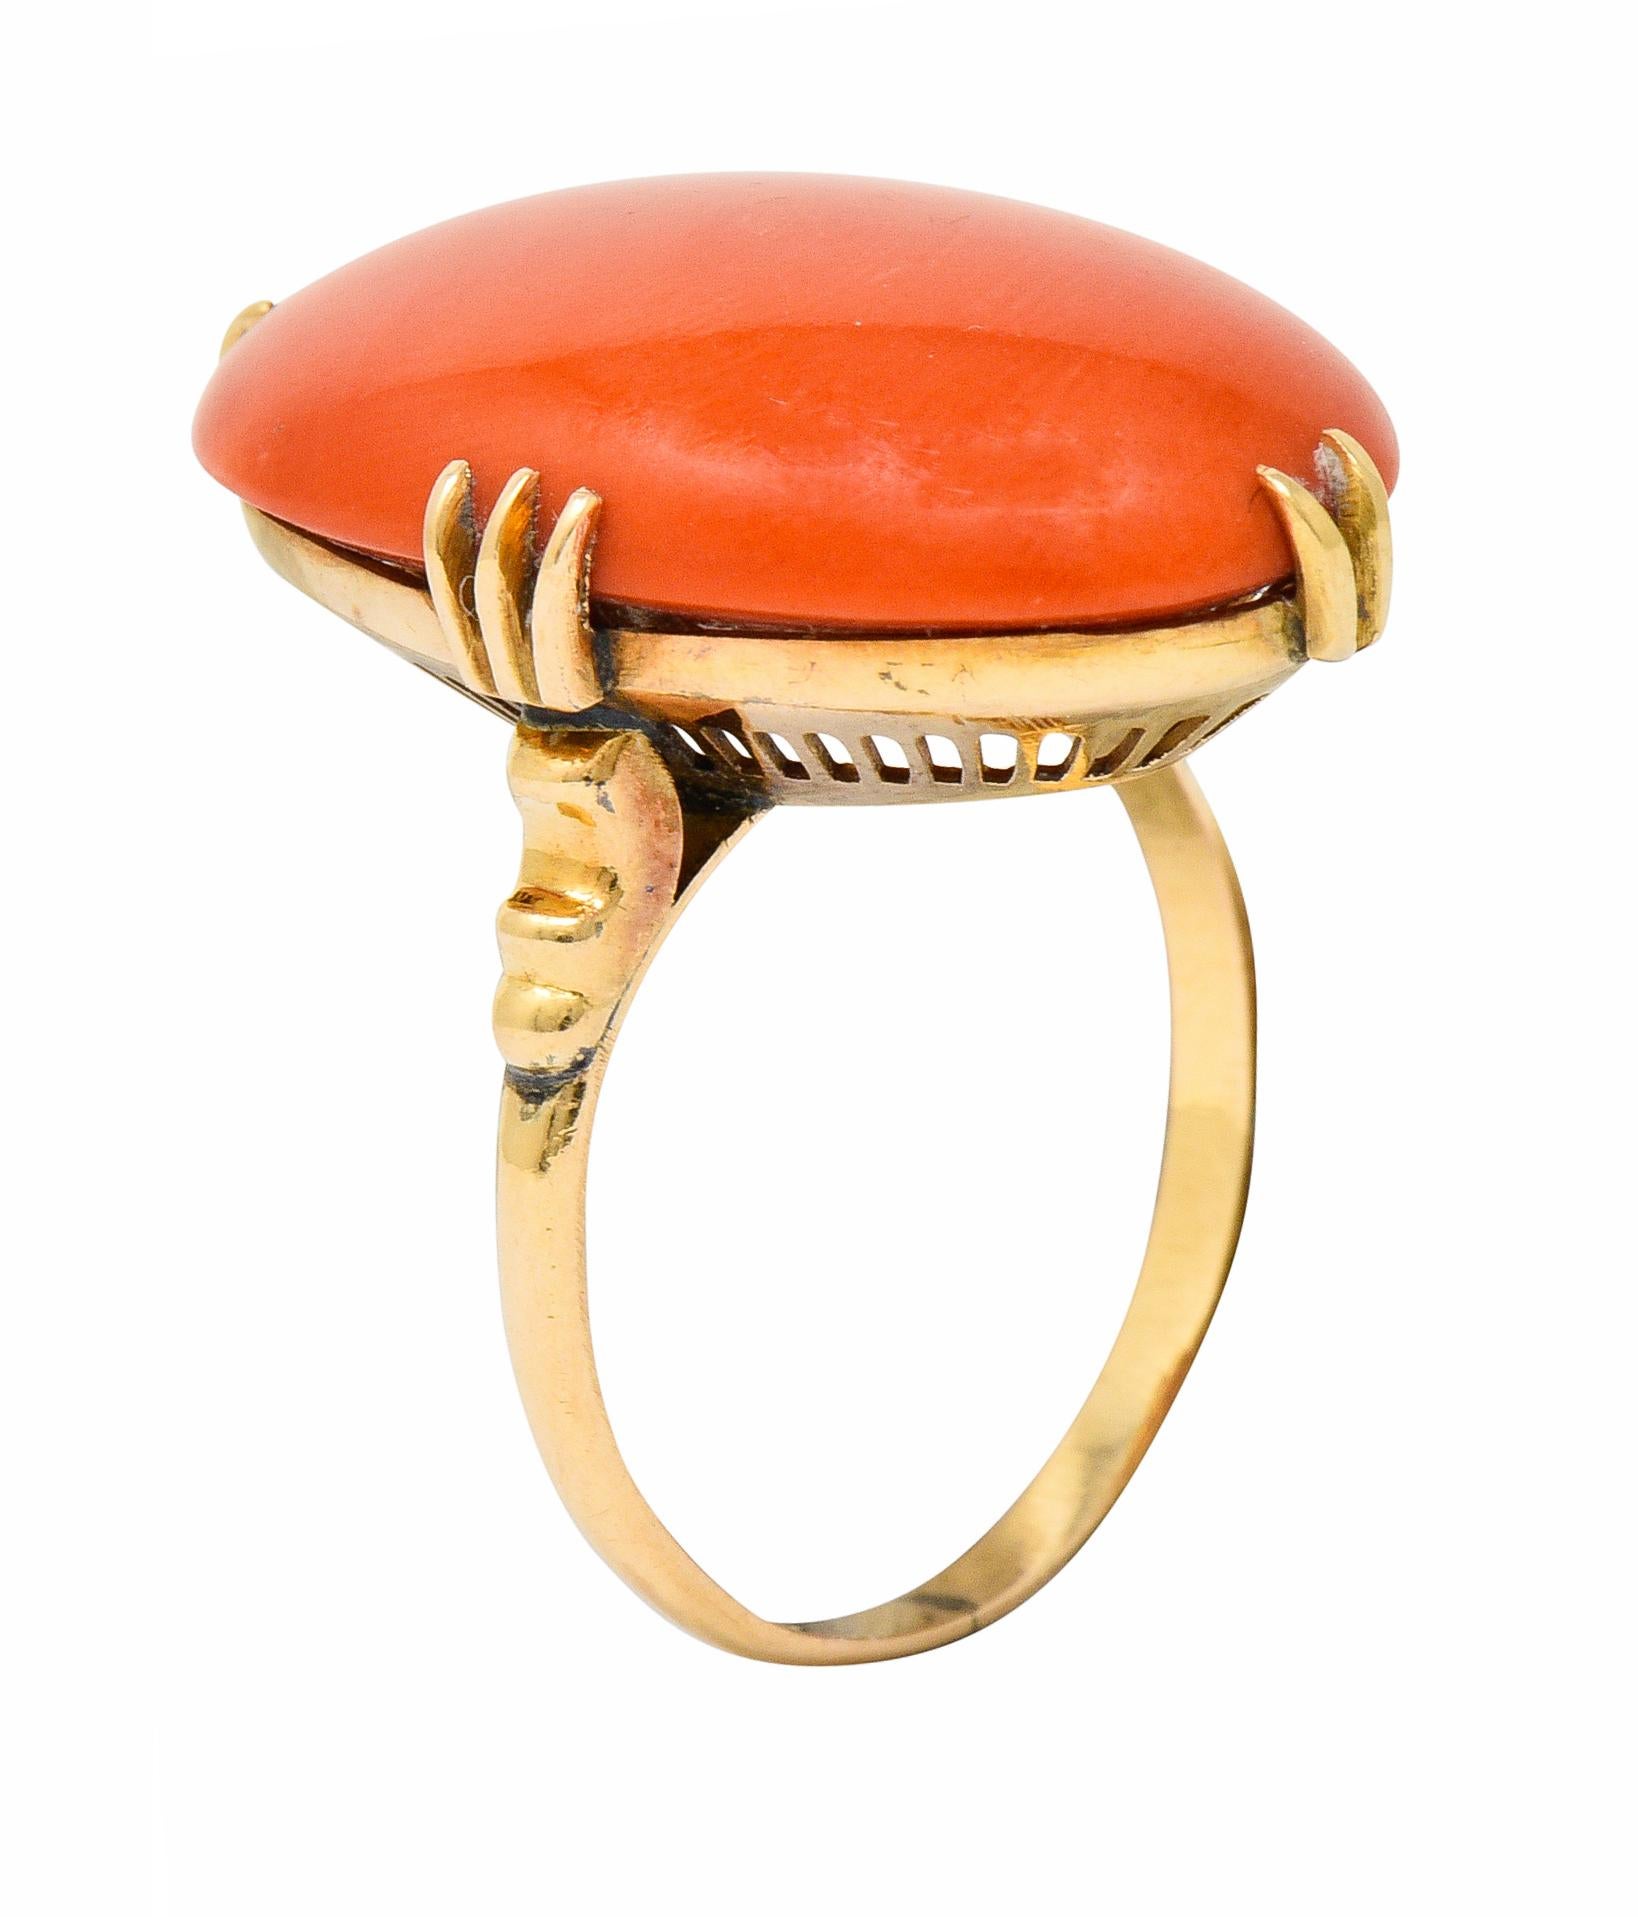 Centering an oval coral cabochon measuring approximately 21.7 x 13.5 mm

Opaque and a saturated reddish-orange color with very even distribution

Set with split prongs and features a pierced striated gallery

Stamped K18 for 18 karat gold

Circa: